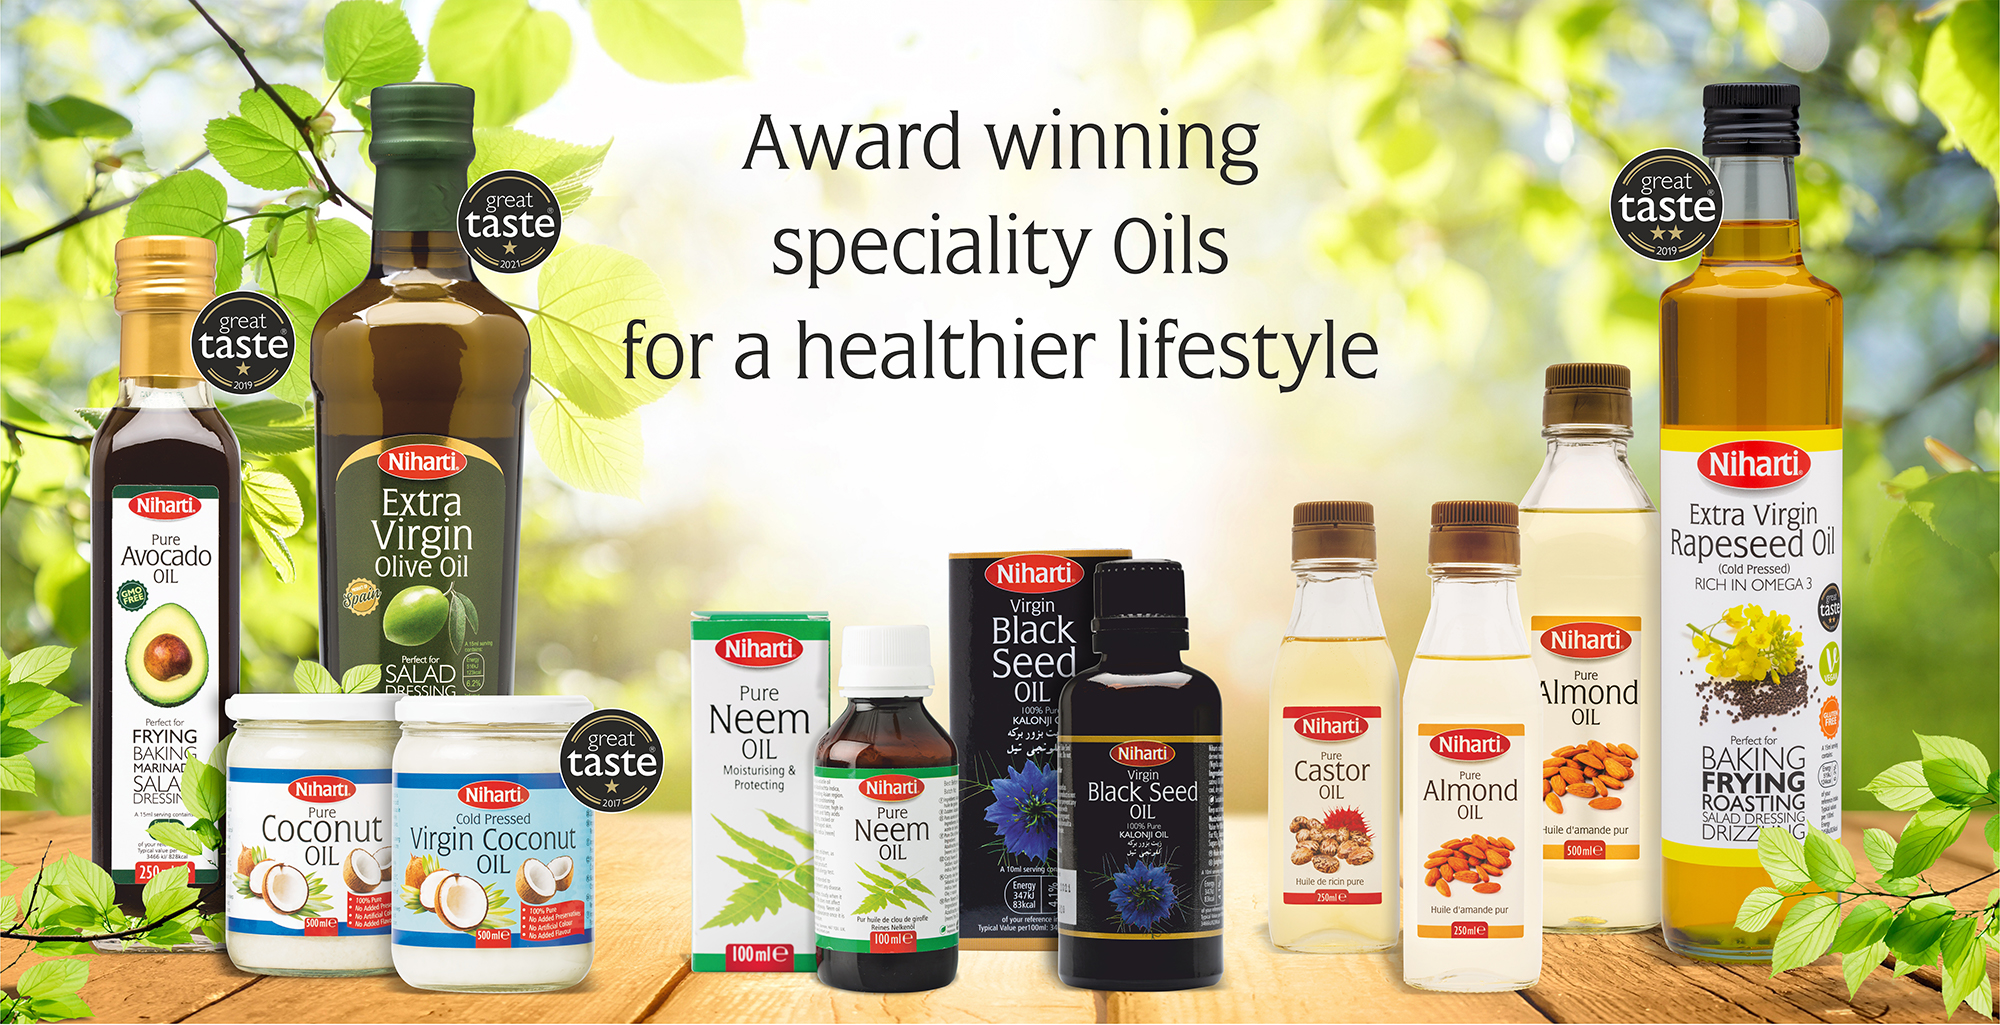 Award winning speciality oils for a healthier lifestyle